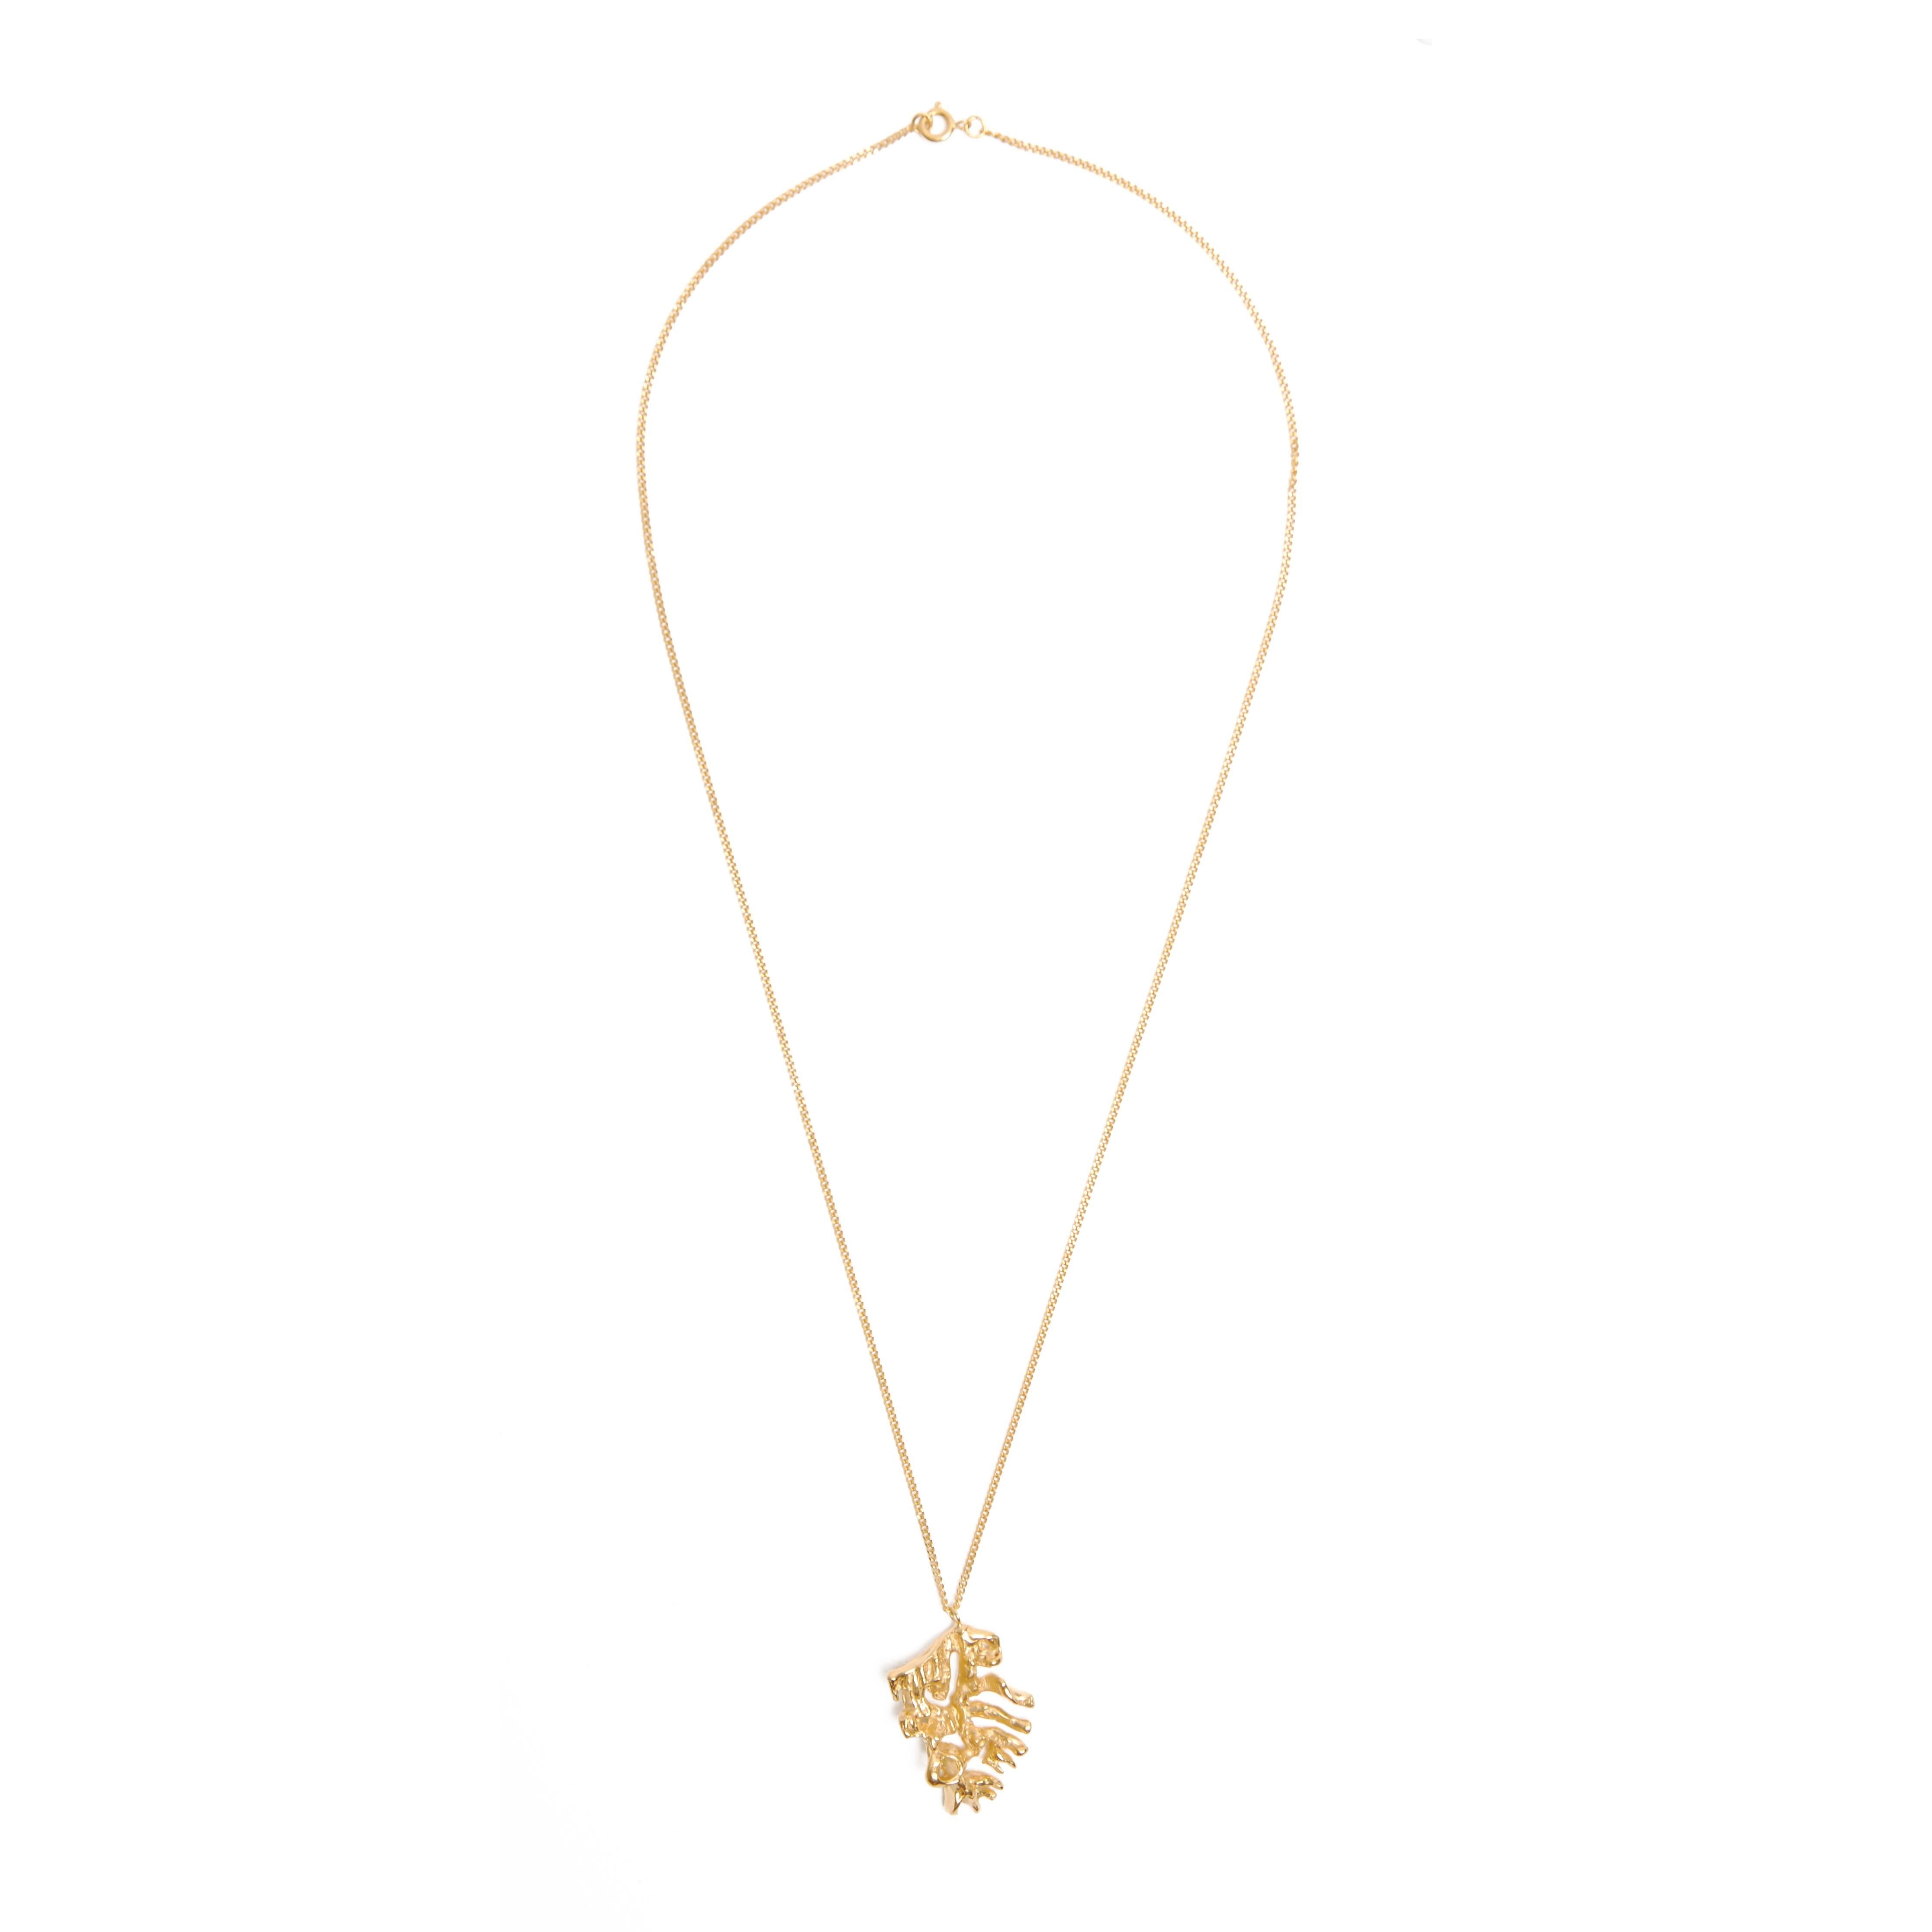 The Chinese zodiac Rooster necklace is inspired by the ancient Chinese calligraphy character of Rooster (Ji 鸡), the tenth of the twelve signs of the Chinese zodiac. Roosters are moral, motivated, and shrewd, and are blessed with a natural,